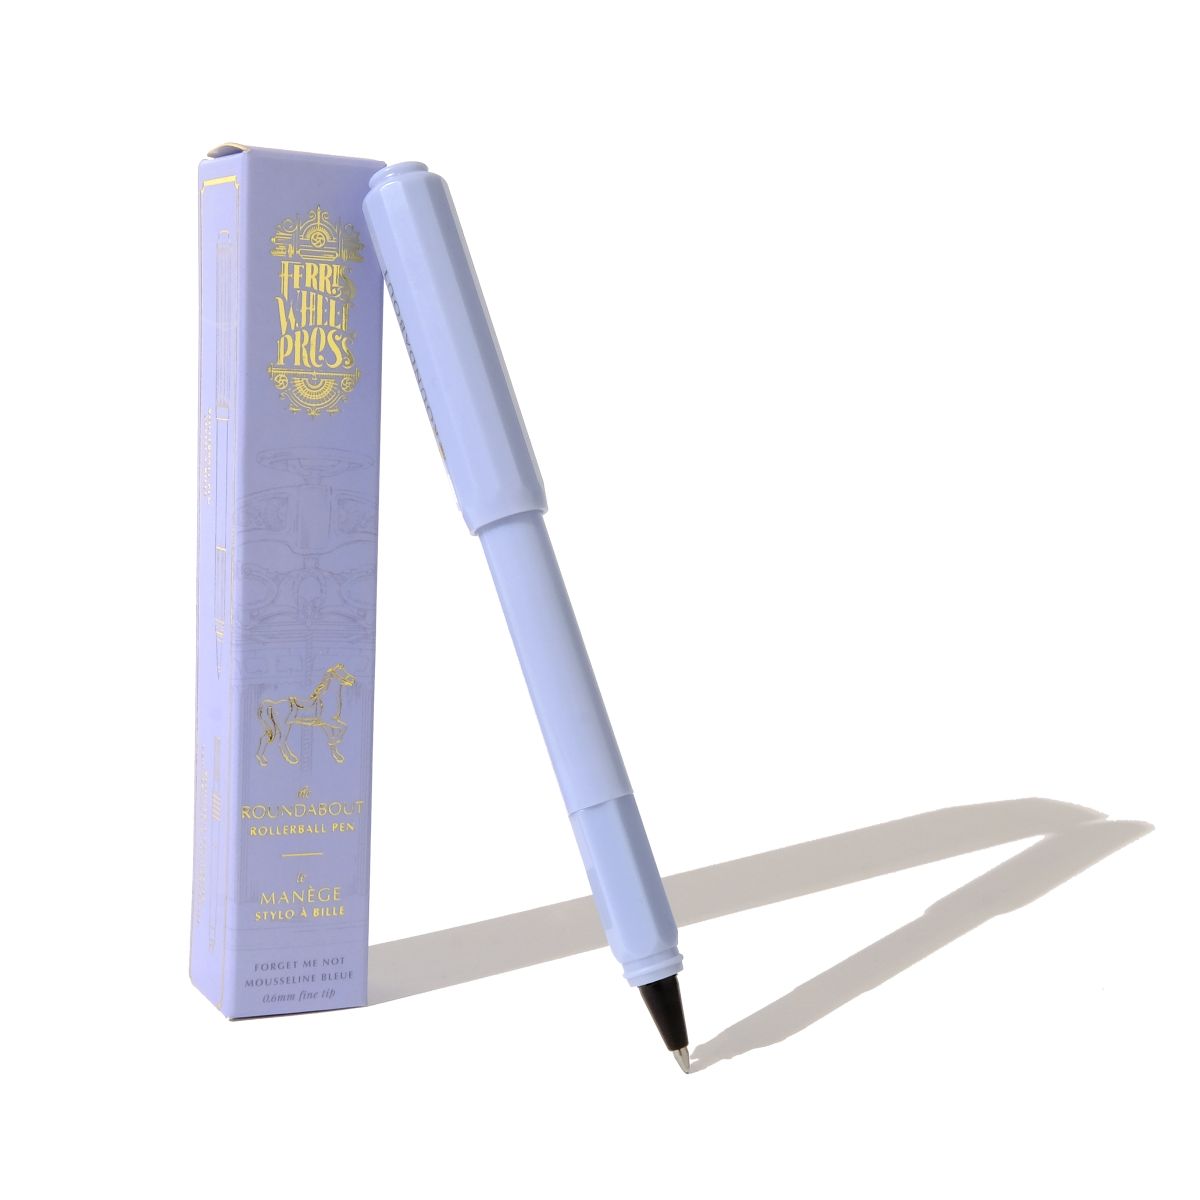 Ferris Wheel Press - Rollerball Forget Me Not